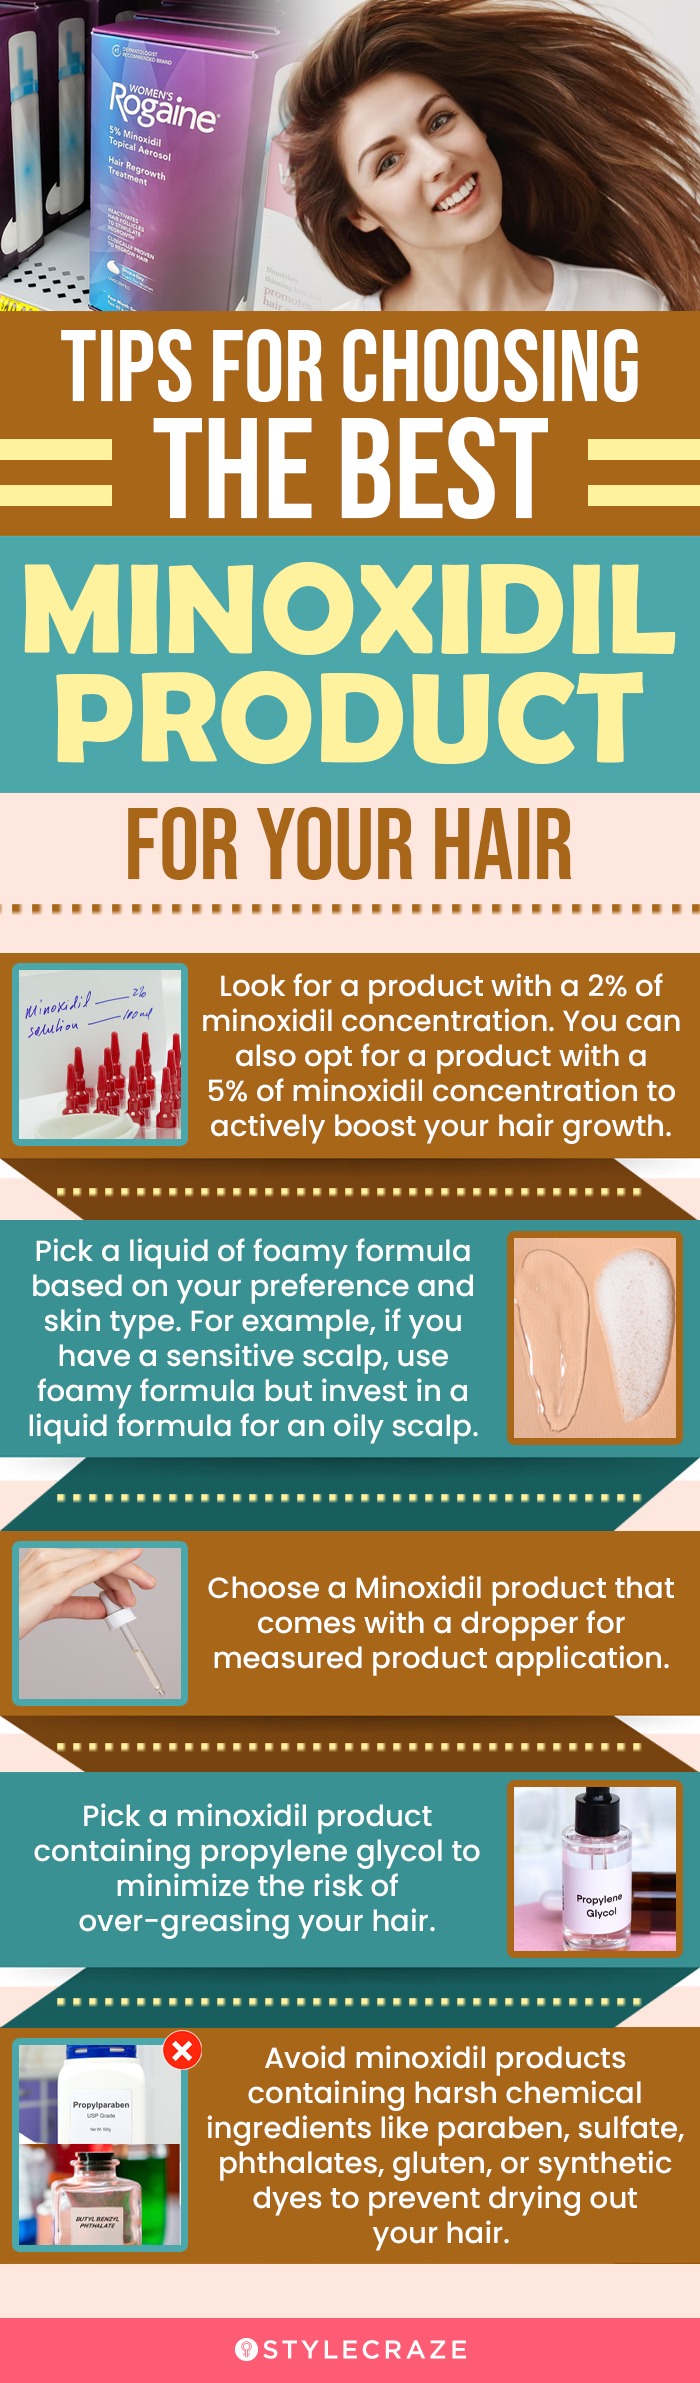 Tips For Choosing The Best Minoxidil Product For You Hair (infographic)